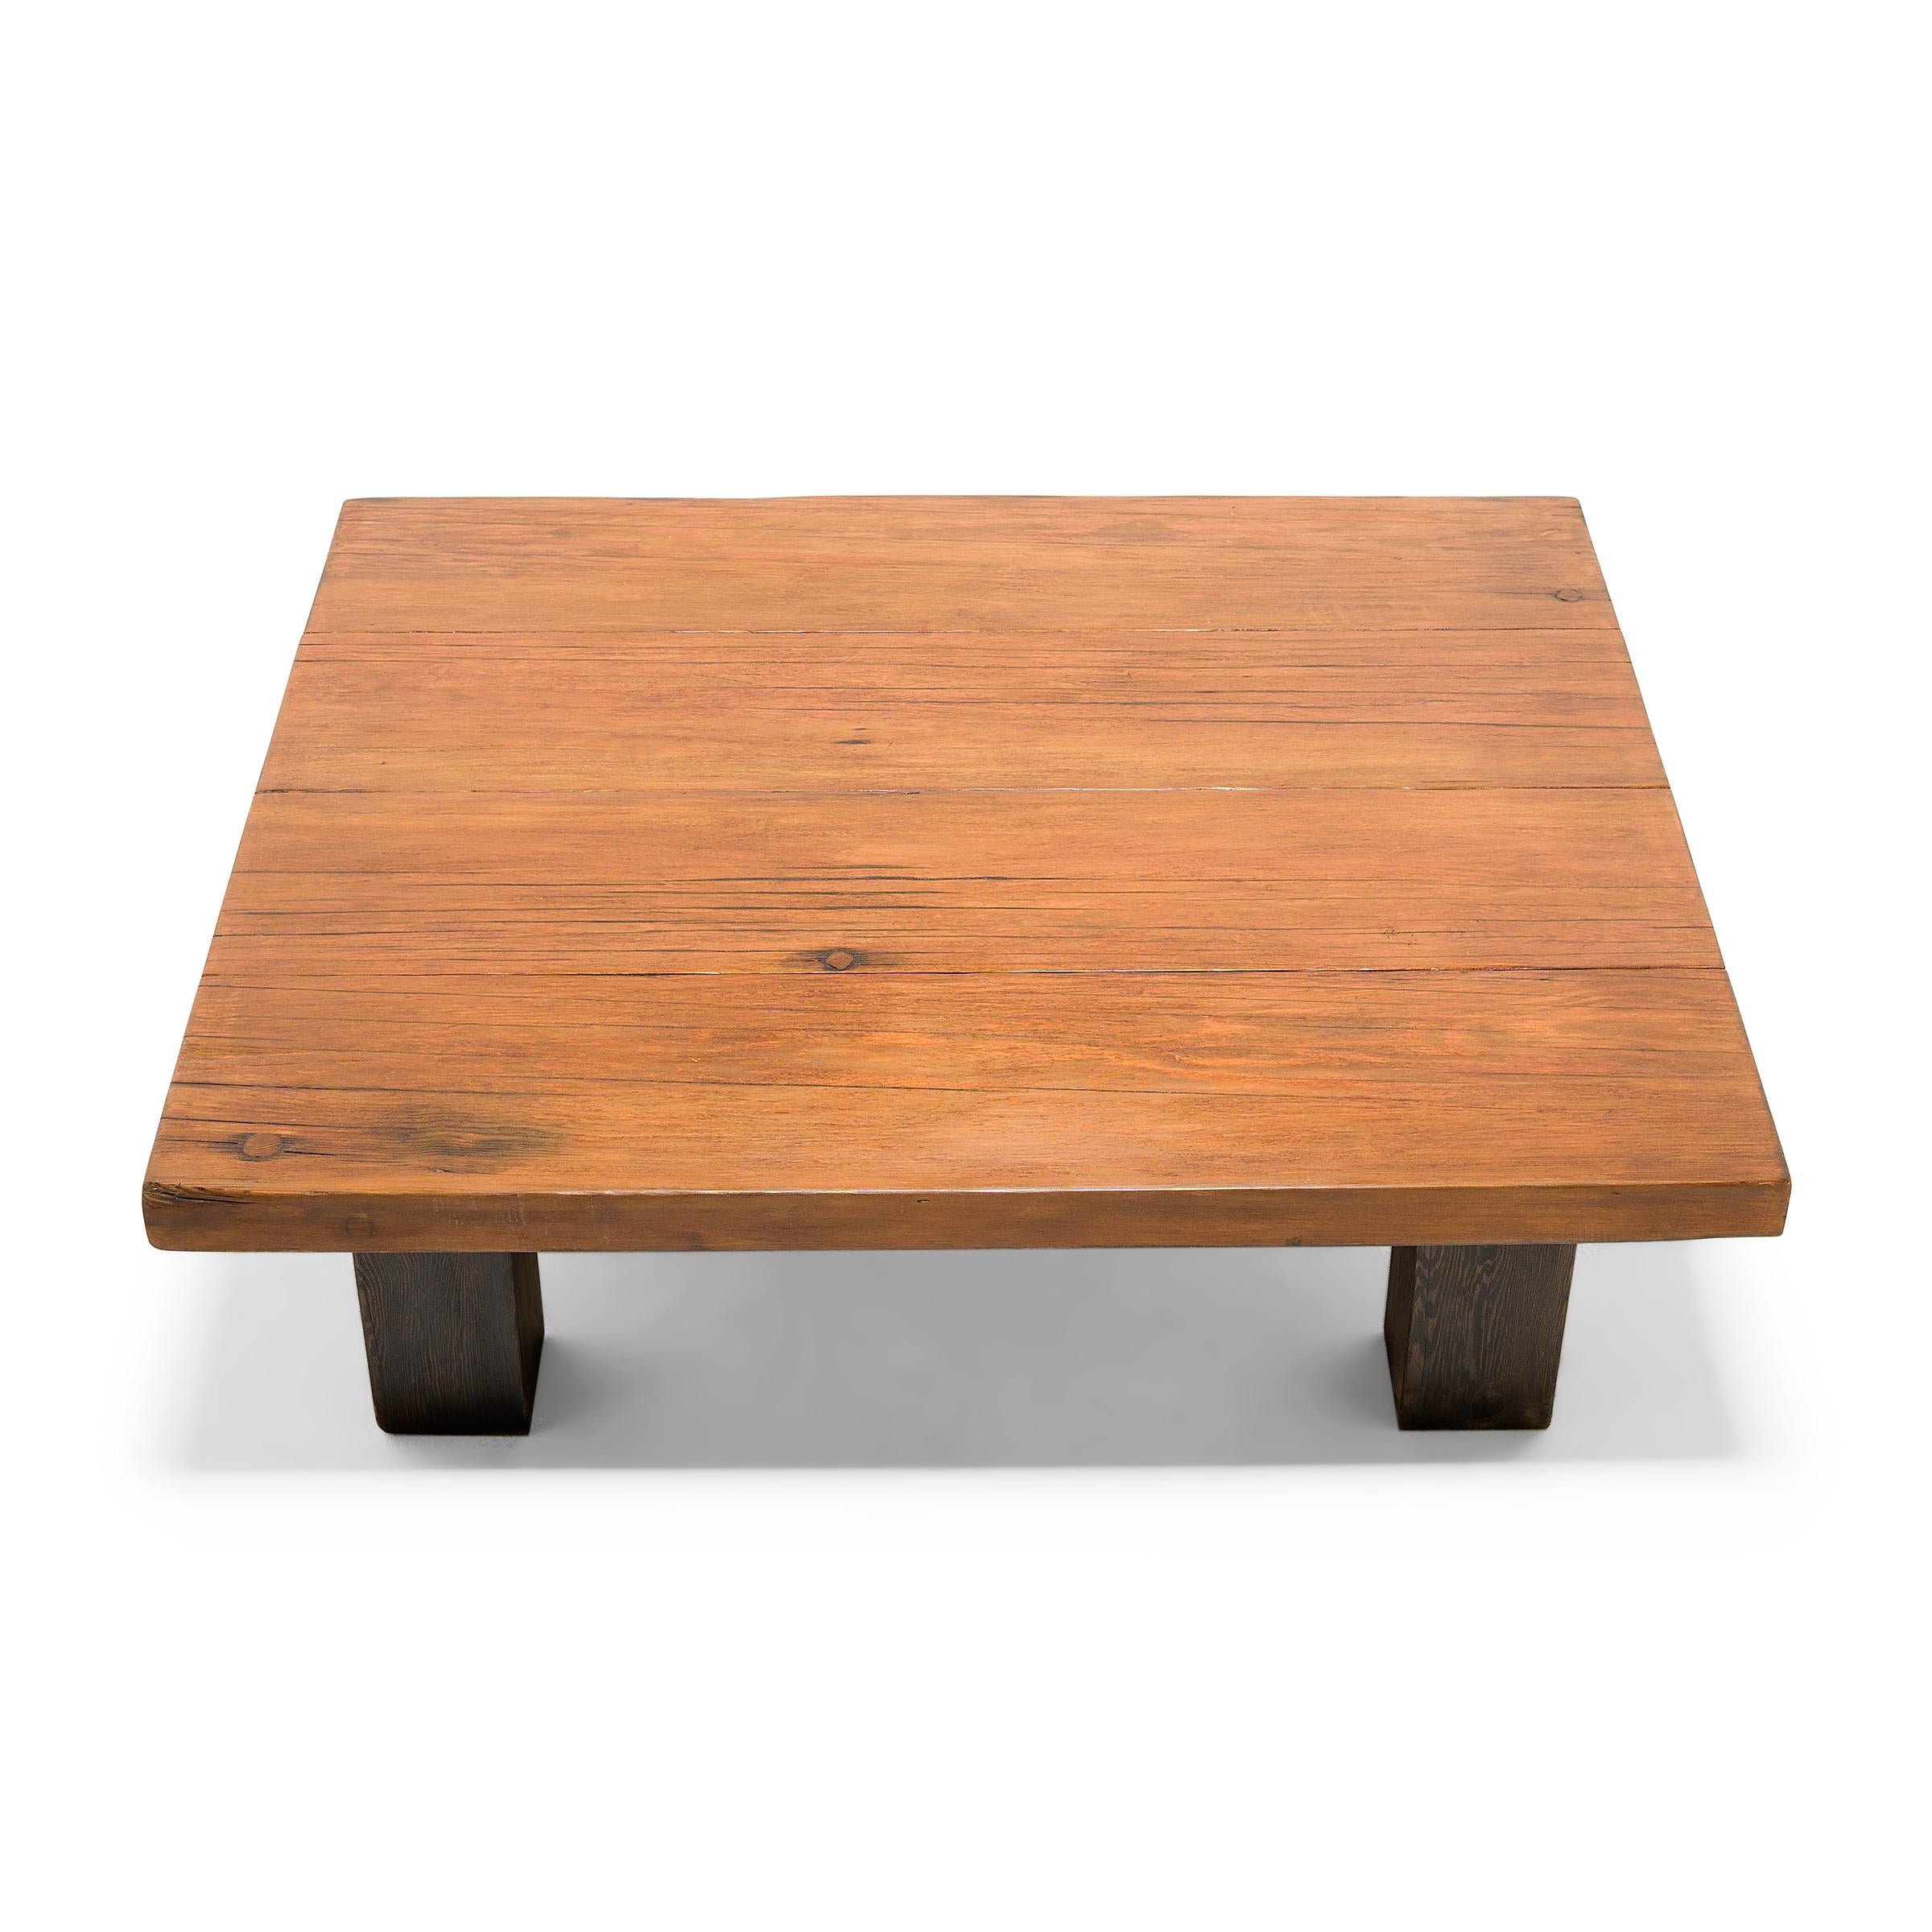 Rustic Low Plank Top Table